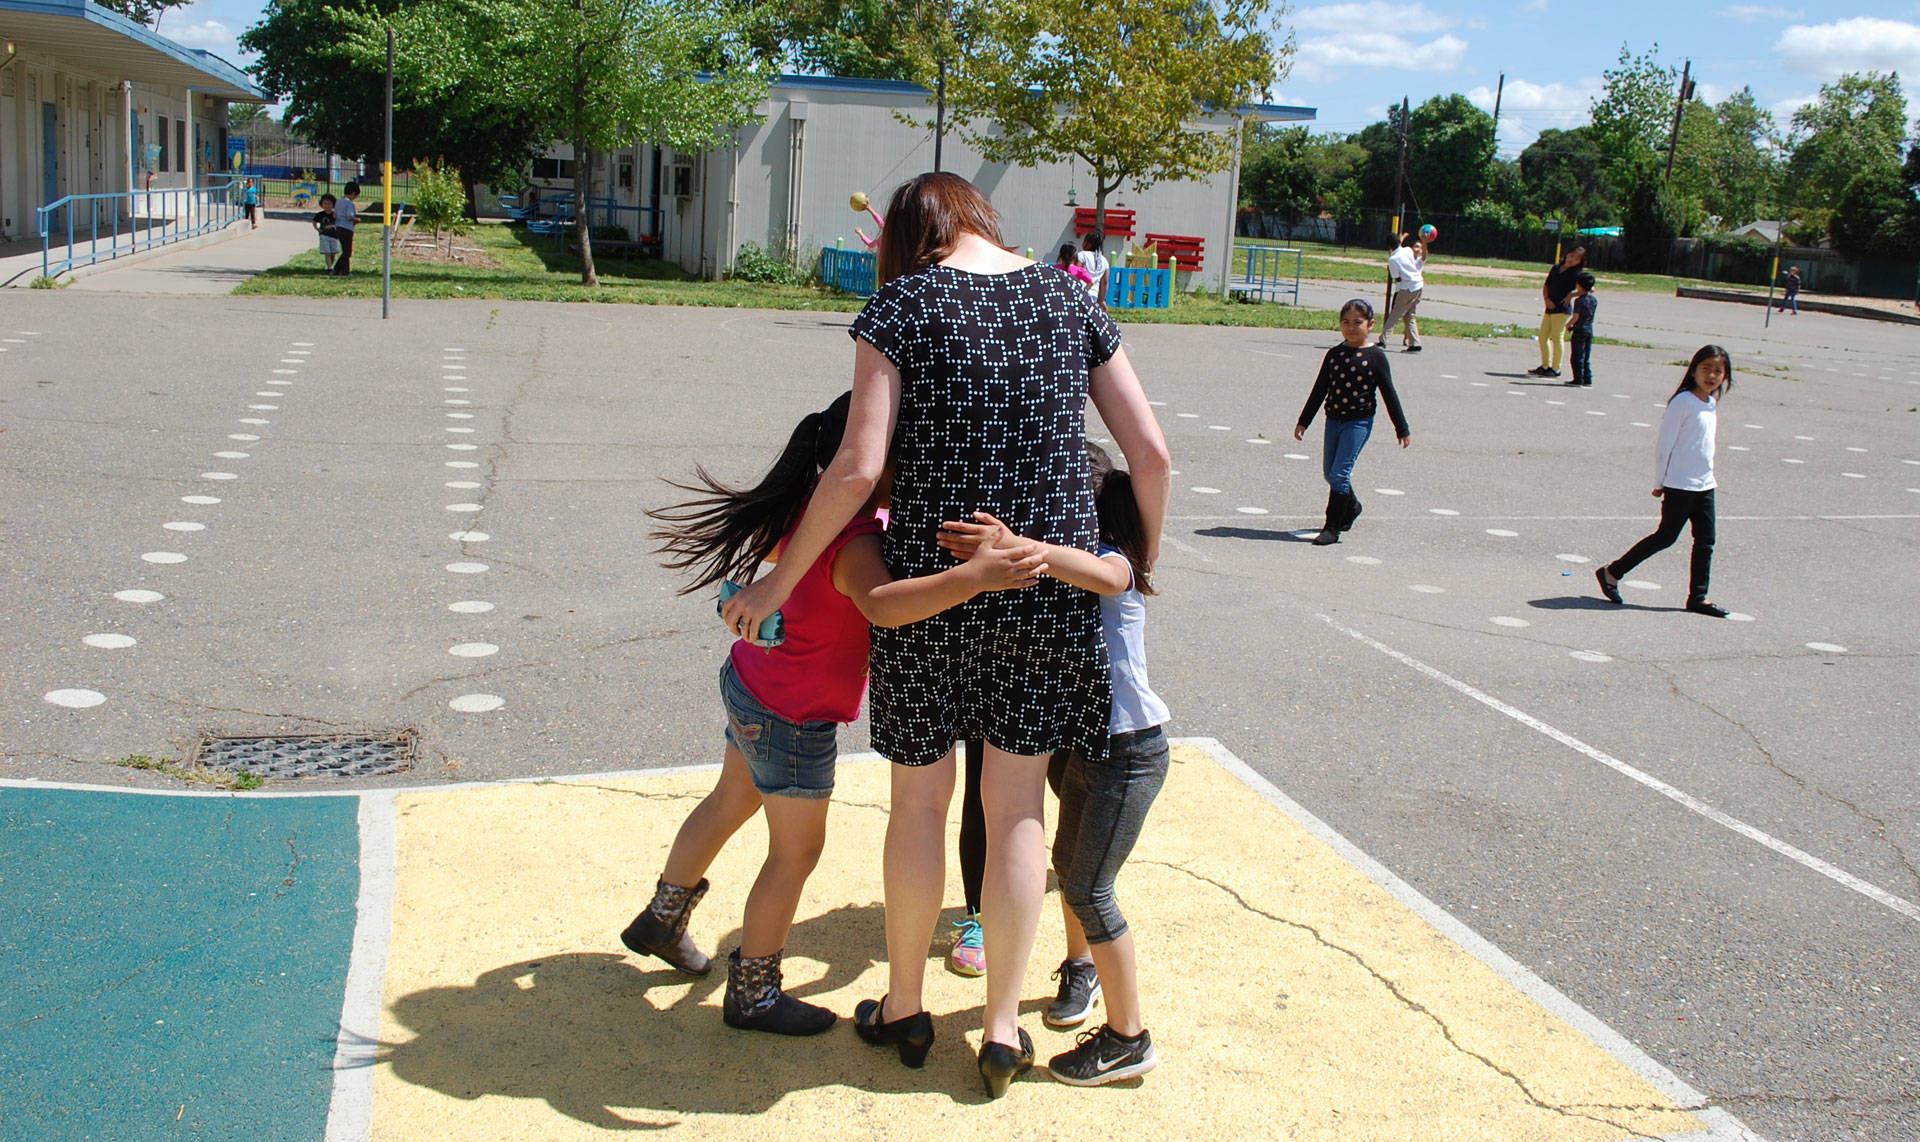 Bethany Coburn, a social worker and coordinator of the Student Support Center at Oak Ridge Elementary, receives a group hug from students on campus. Gabriel Salcedo/KQED